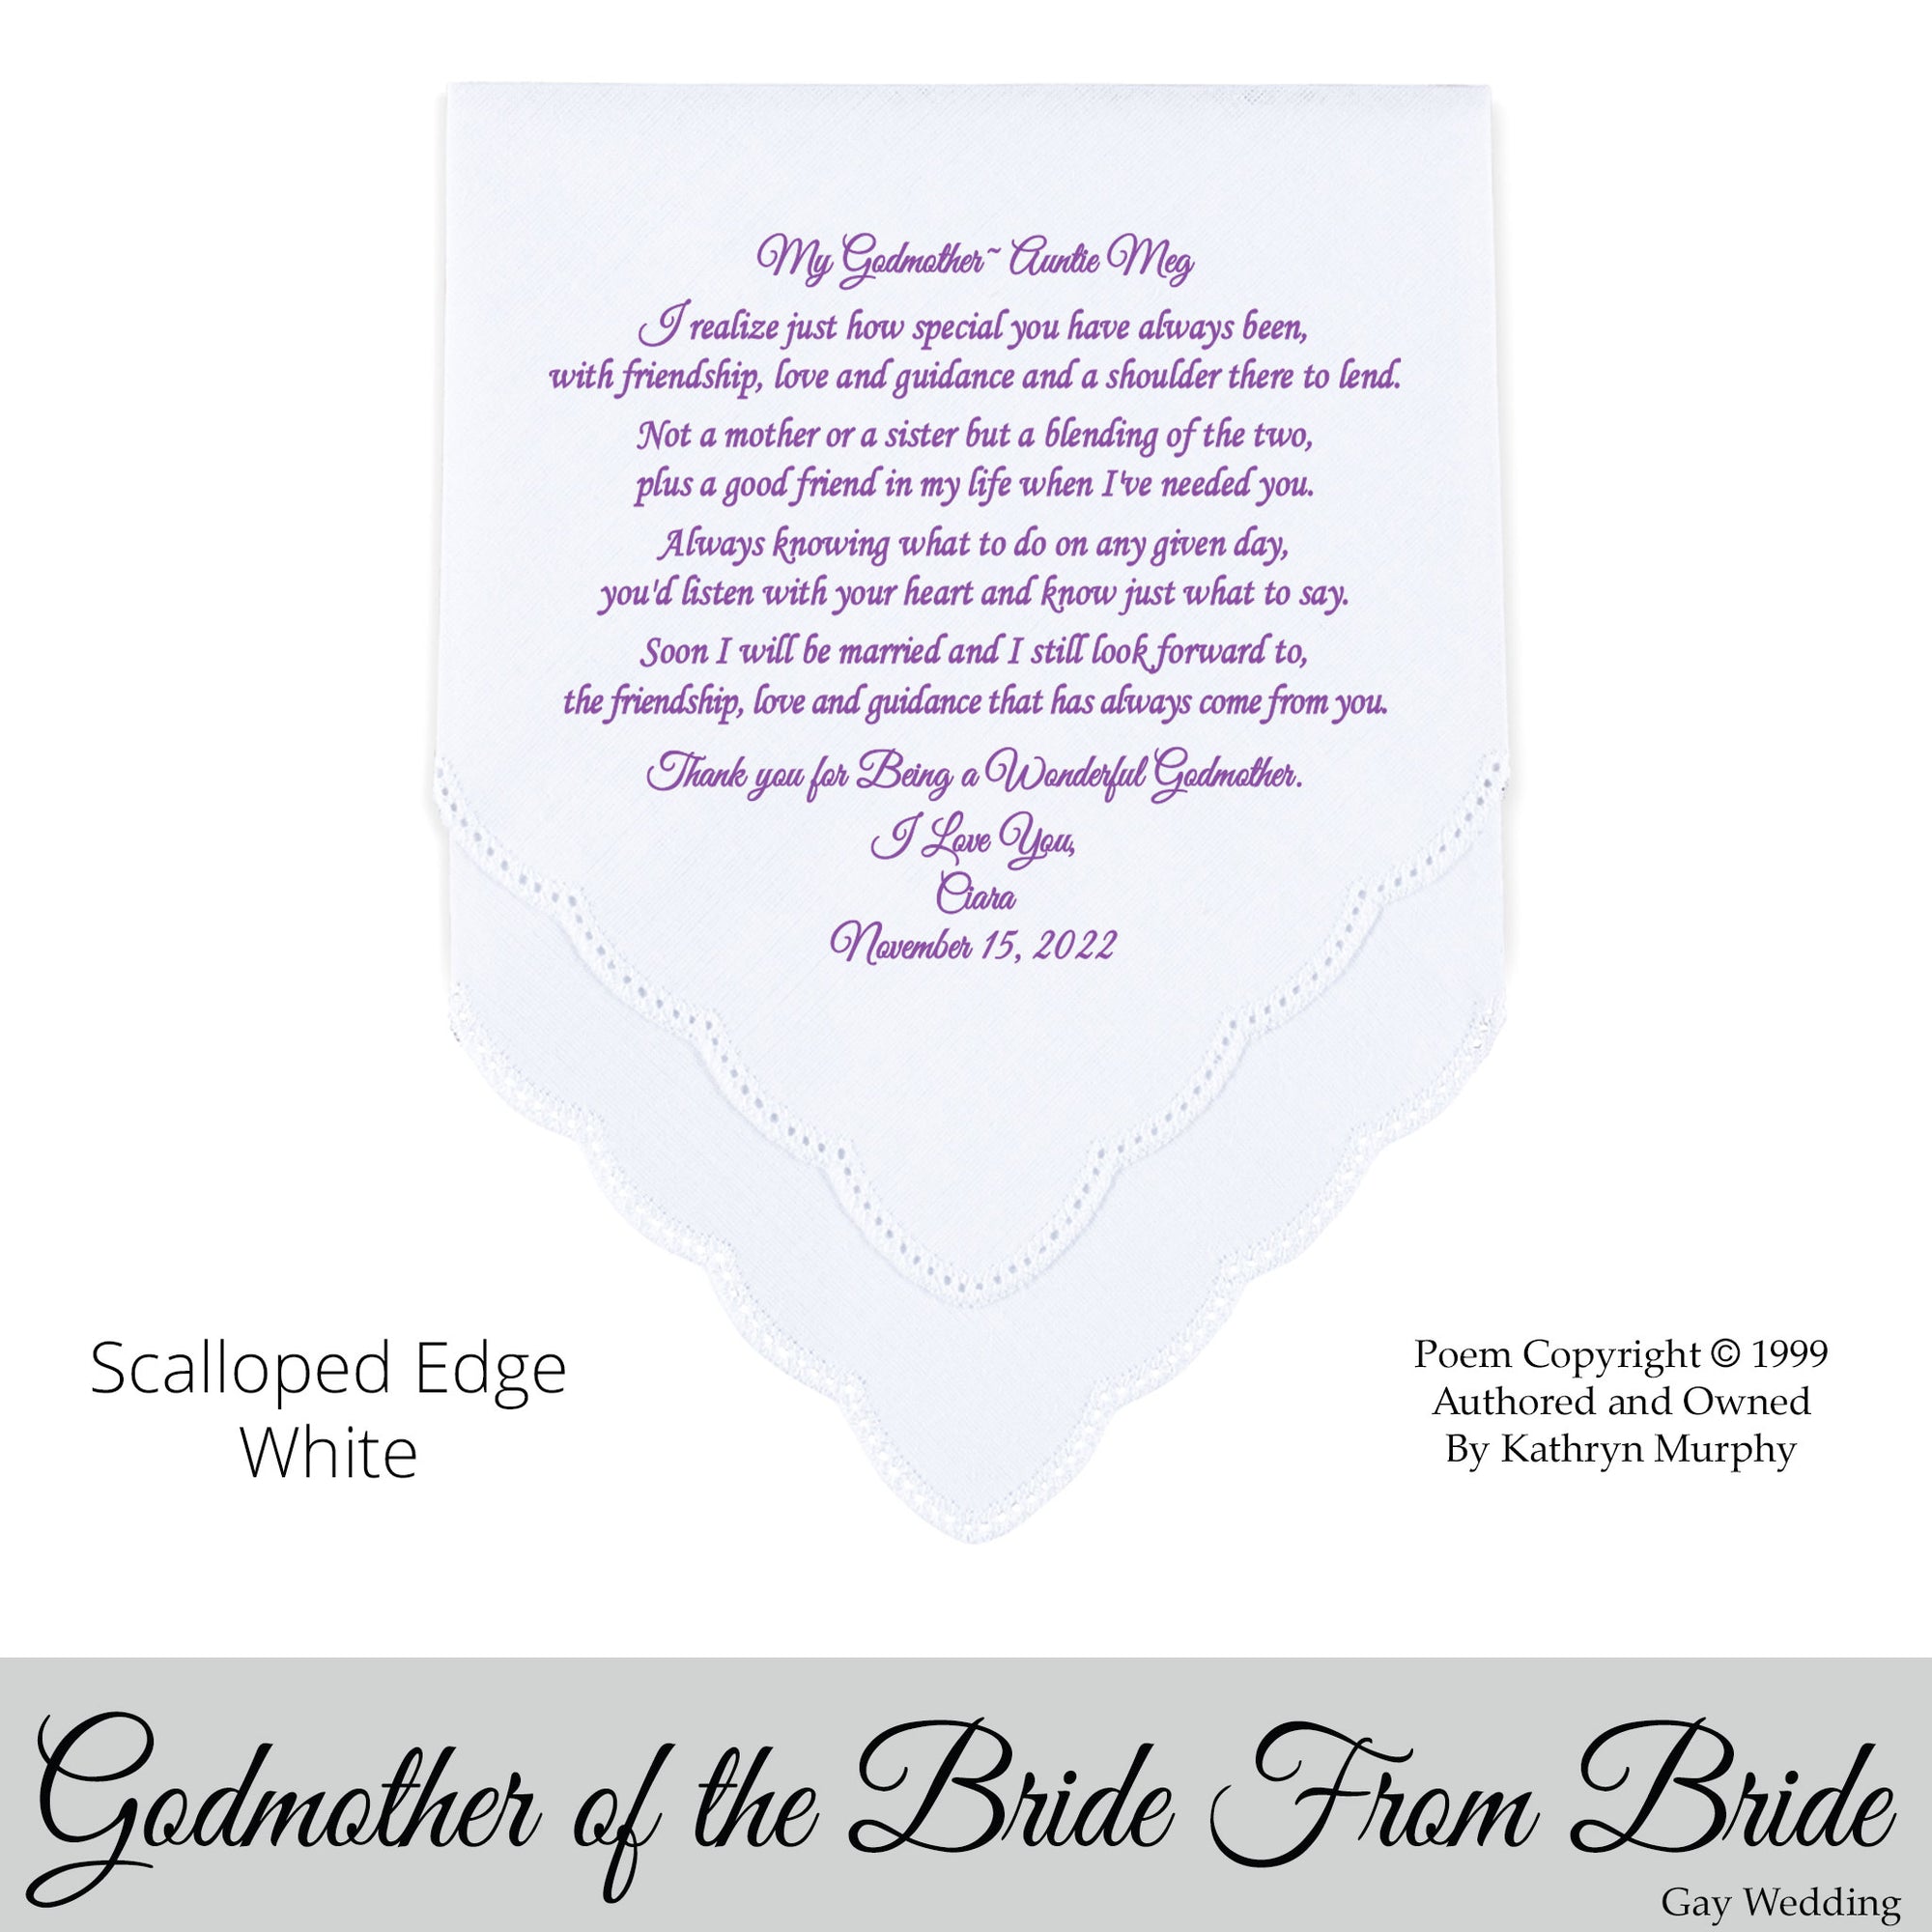 Gay Wedding Gift for the Godmother of the Bride poem printed wedding hankie